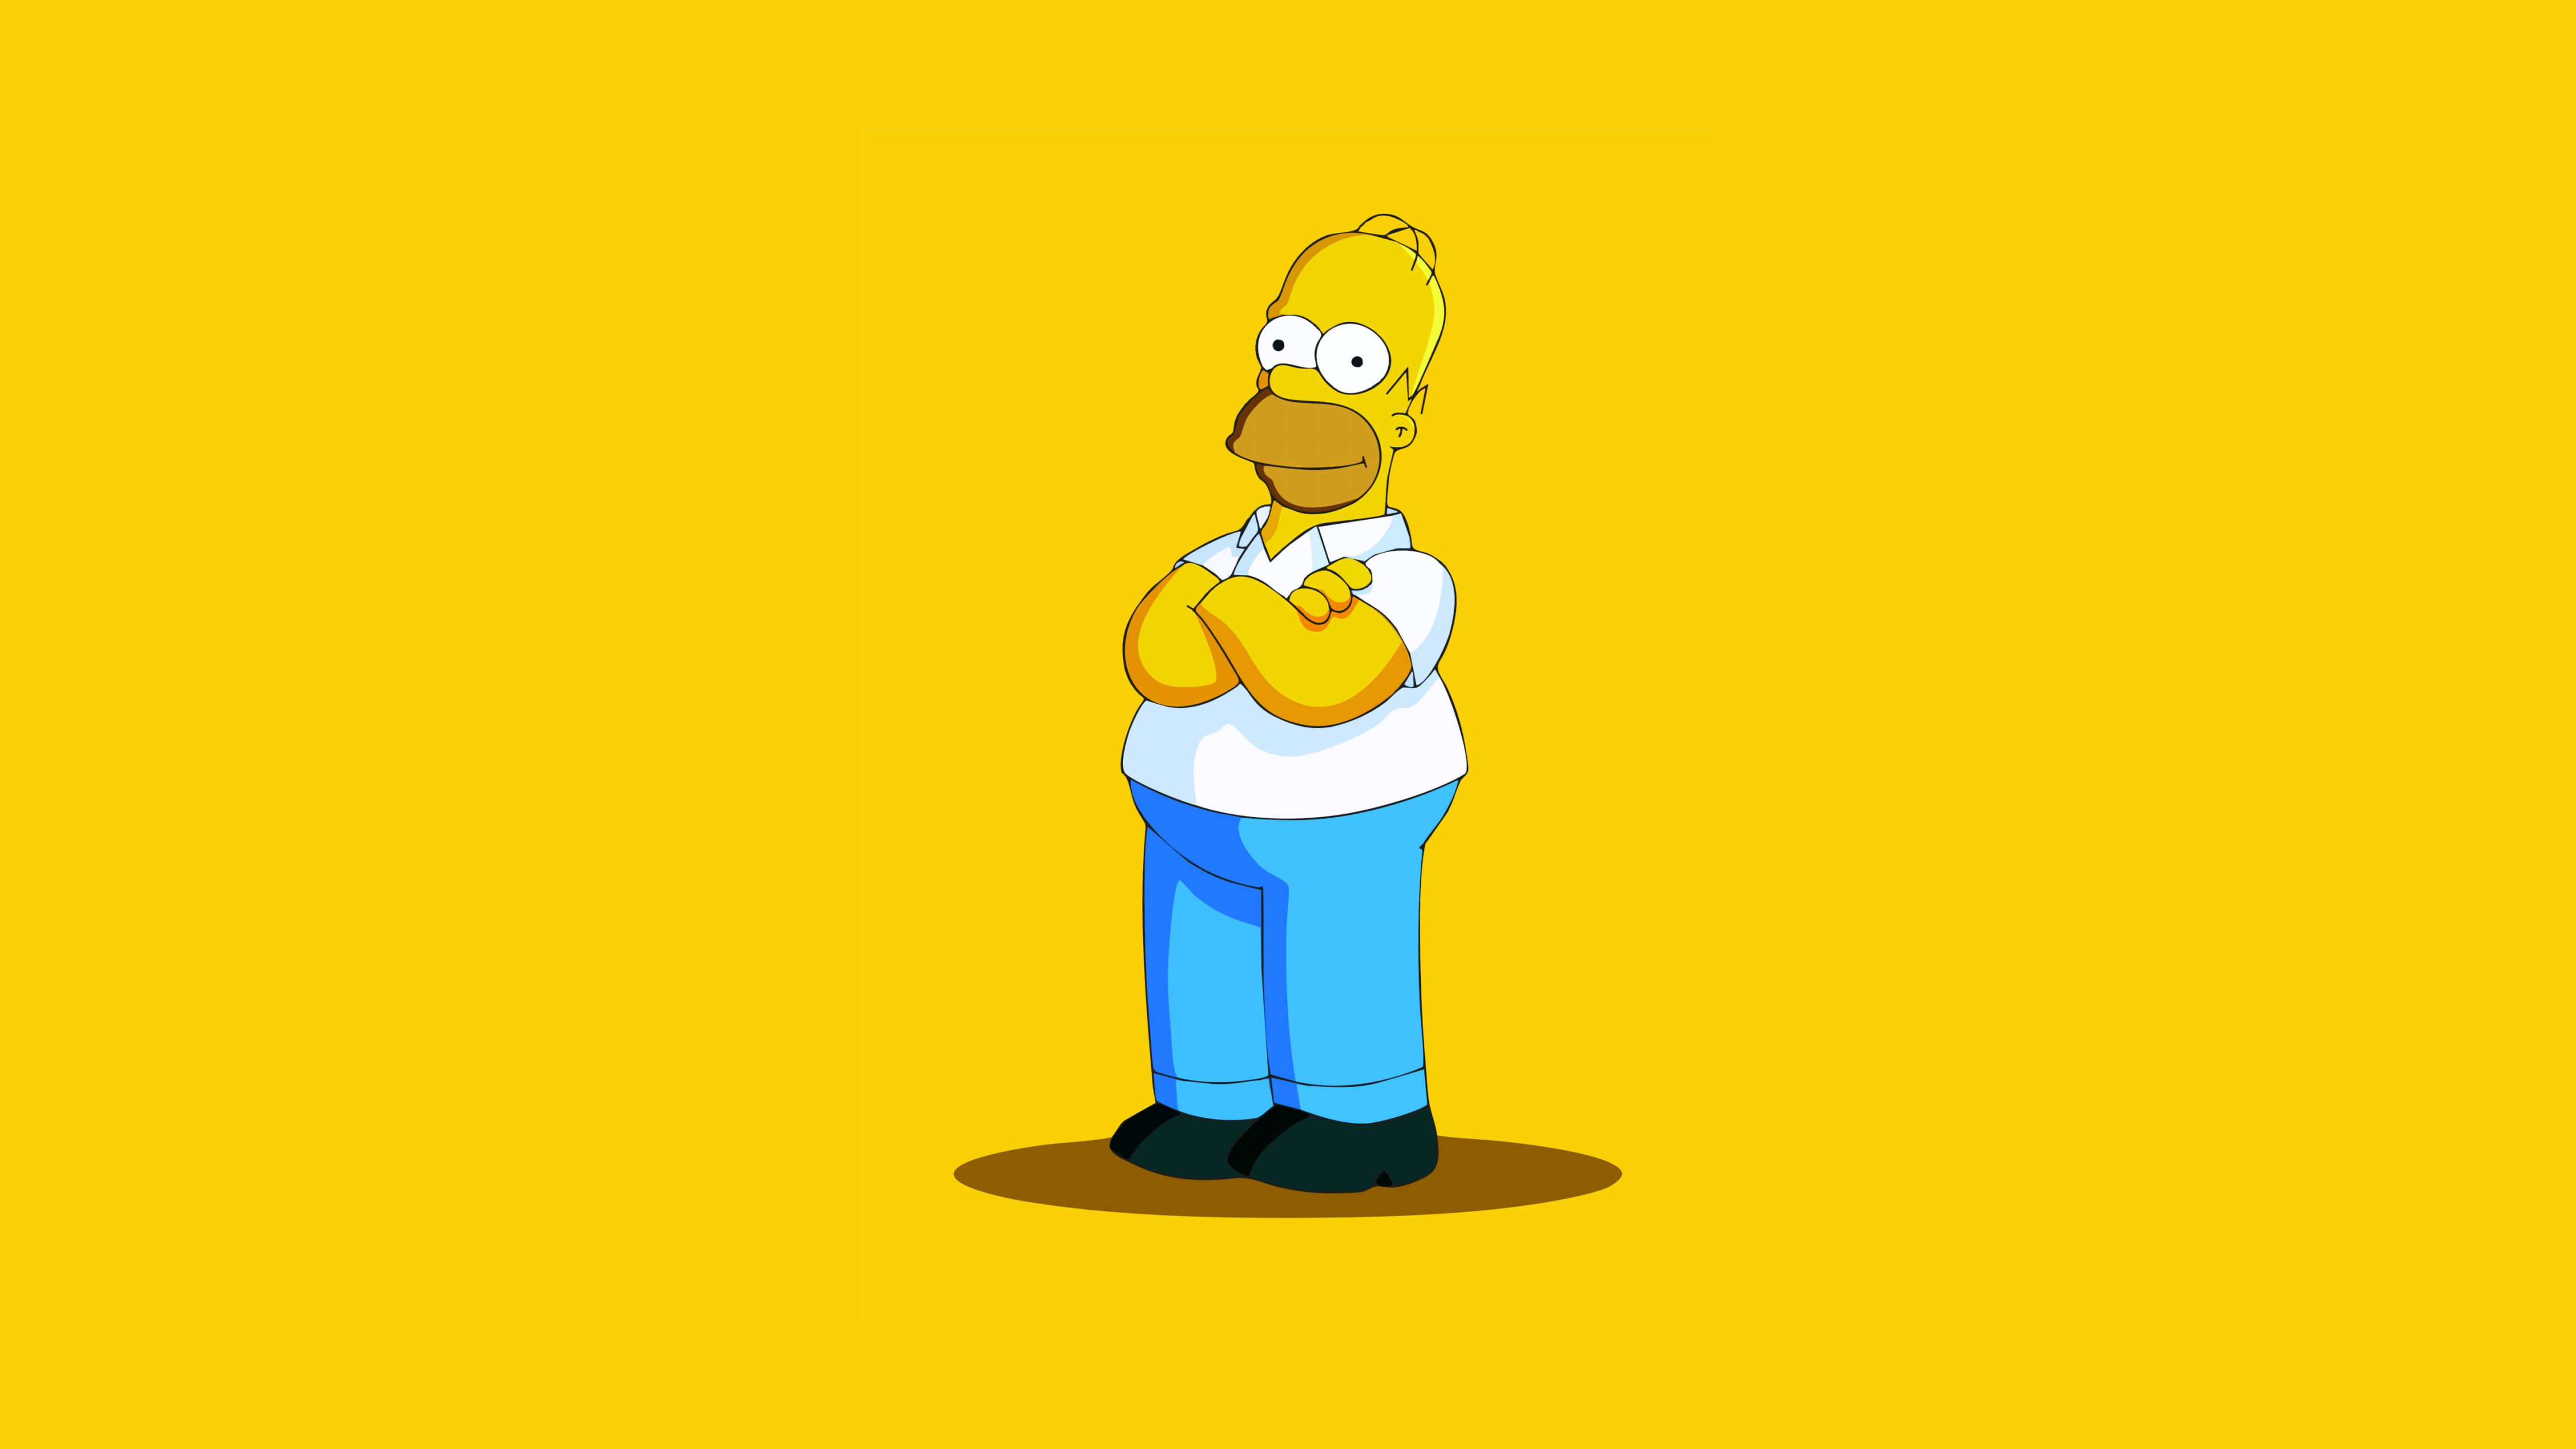 Homer Simpson Wallpaper 4K, The Simpsons, Yellow background